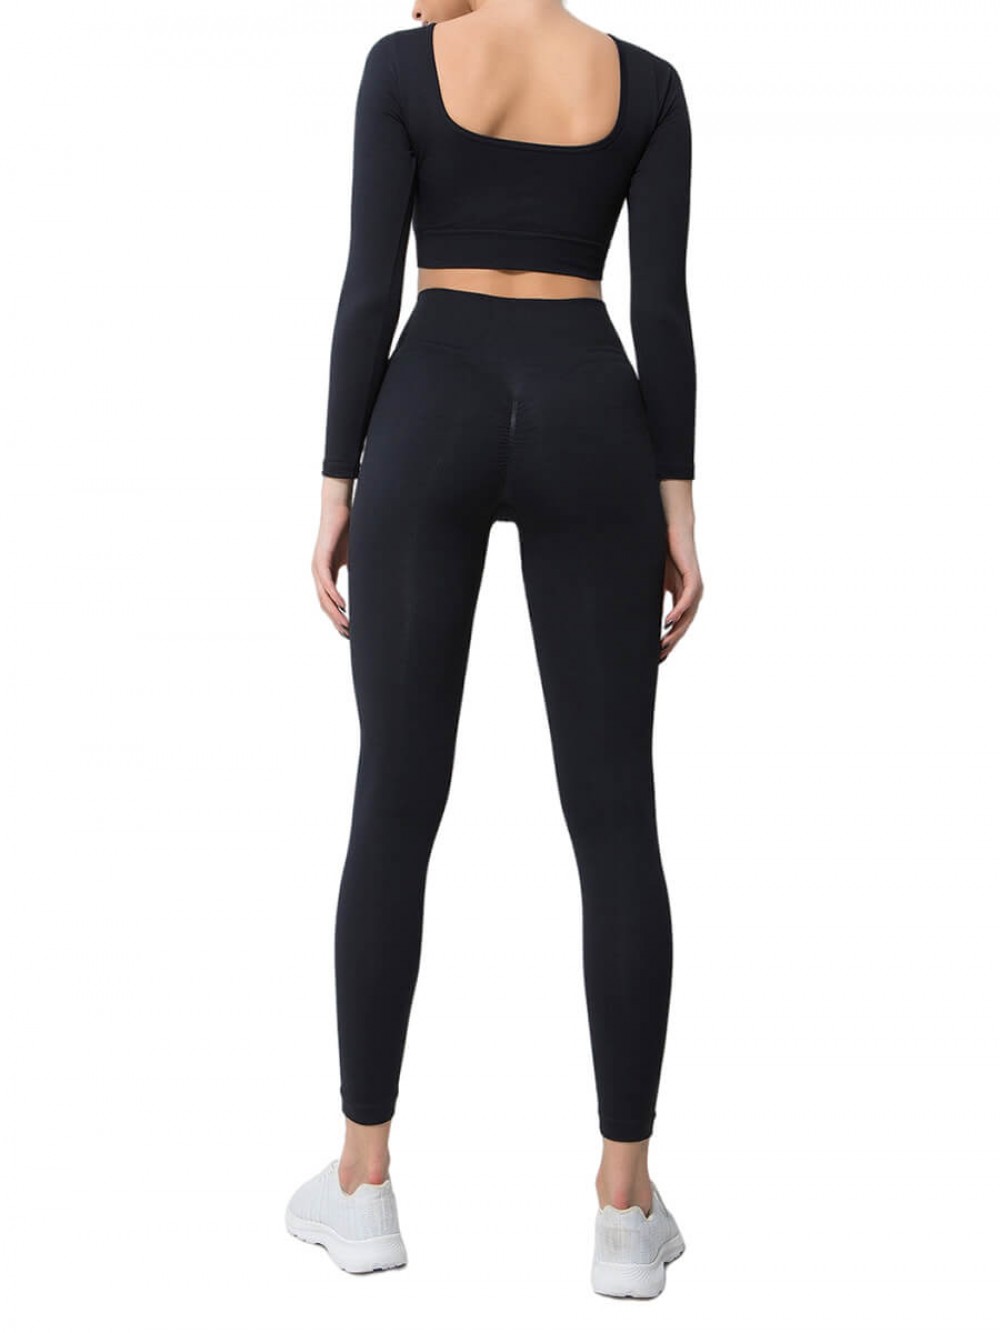 Black Stylish Well-Suited Workout Apparel For Hanging Out